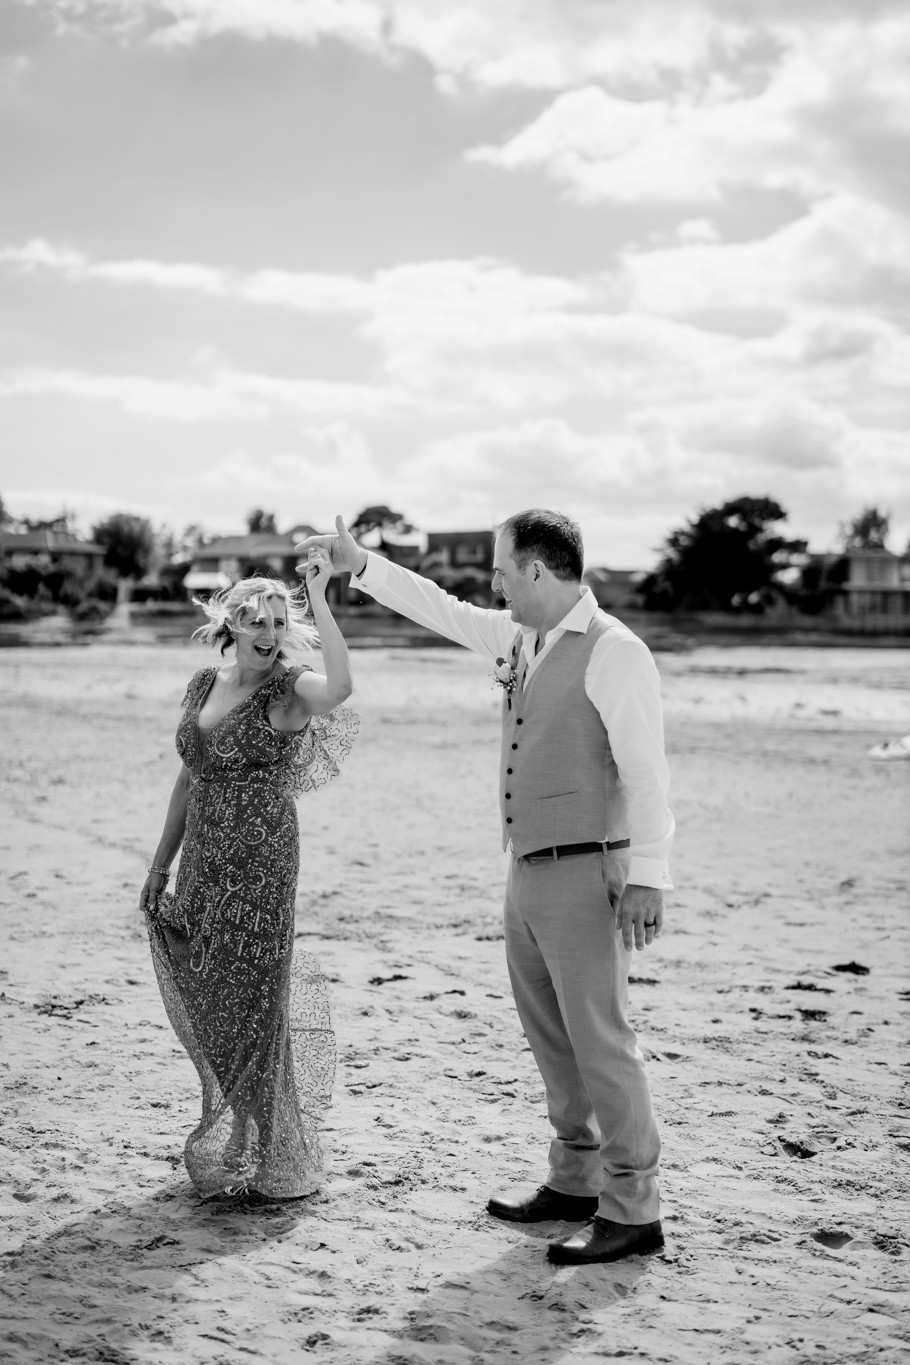 A monochrome image of the groom twirling the bride in a dance motion on the sea